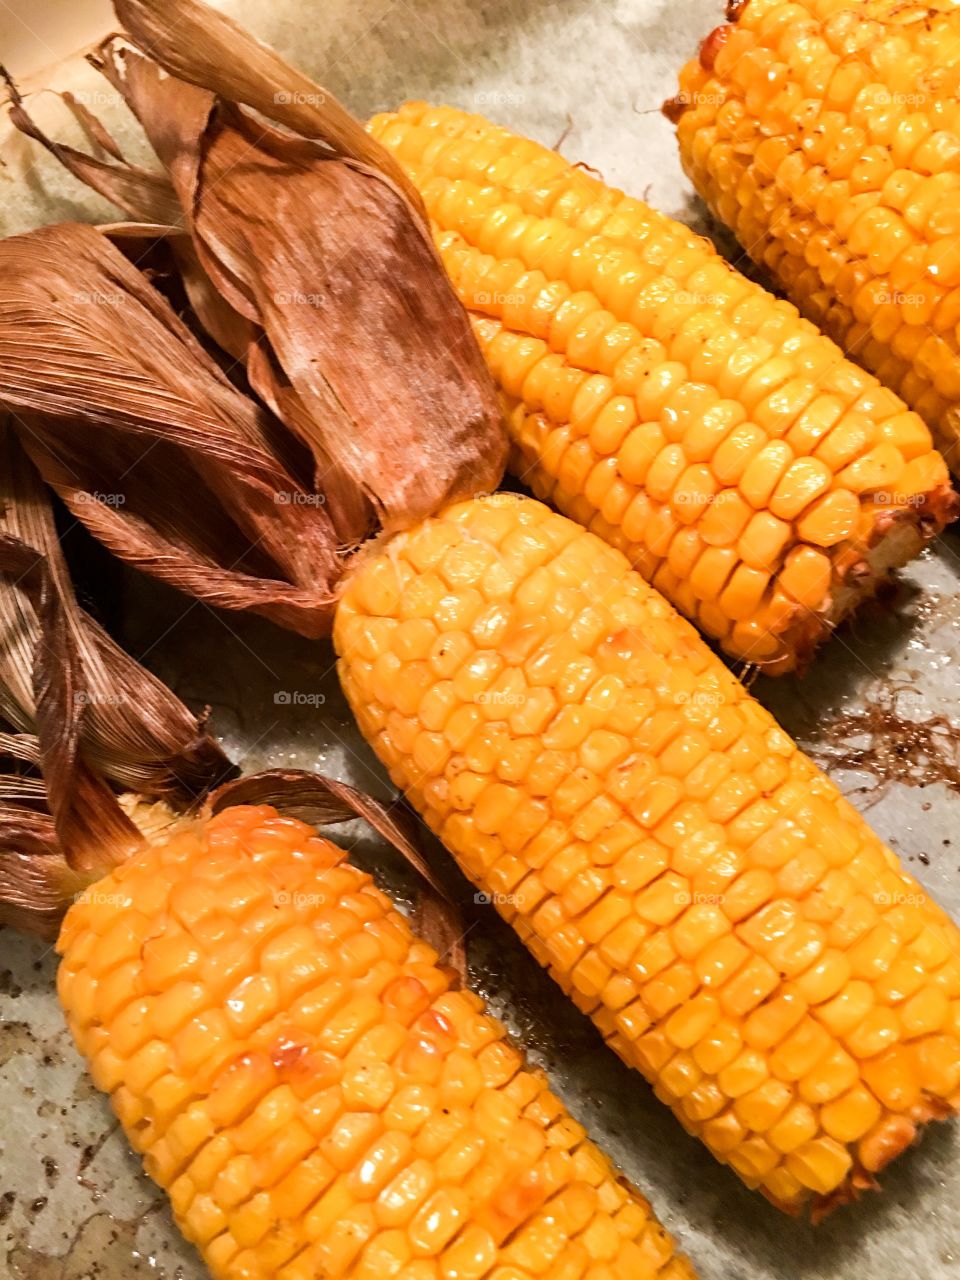 Yellow, juicy, delicious roasted corn on the cob with the husks pulled back, closeup view autumn harvest